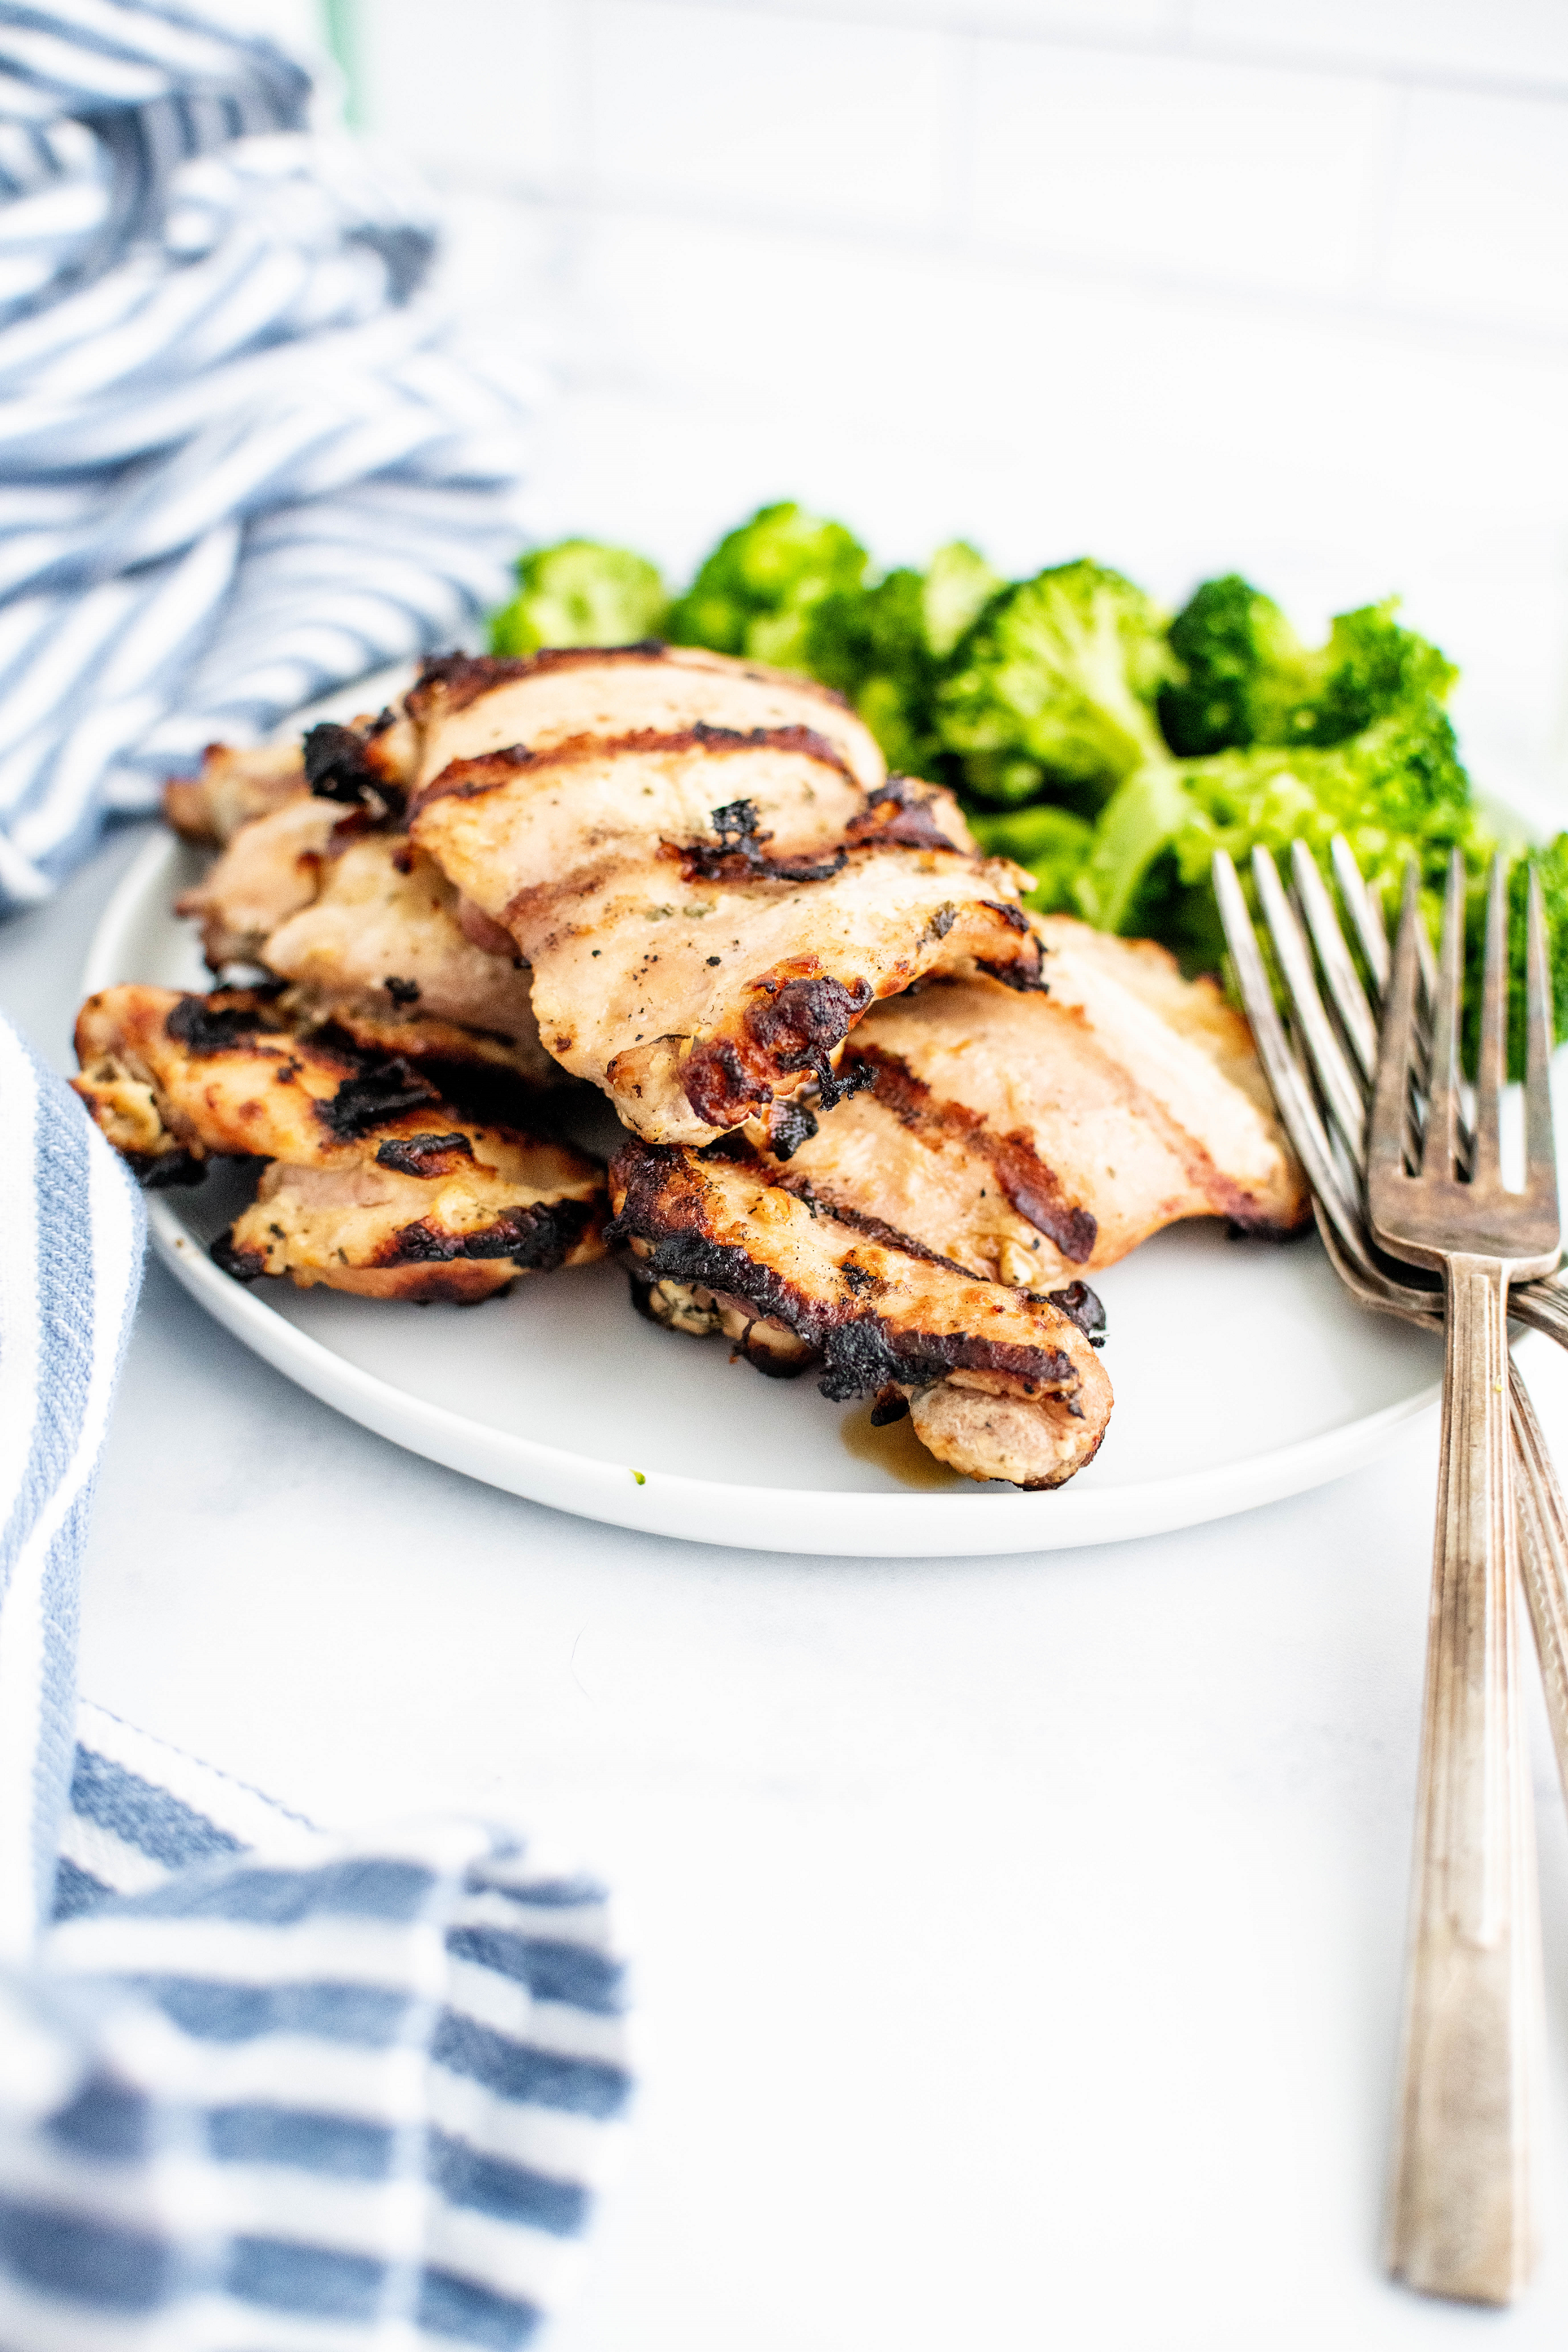 Grilled ranch chicken on a round white plate with steamed broccoli.